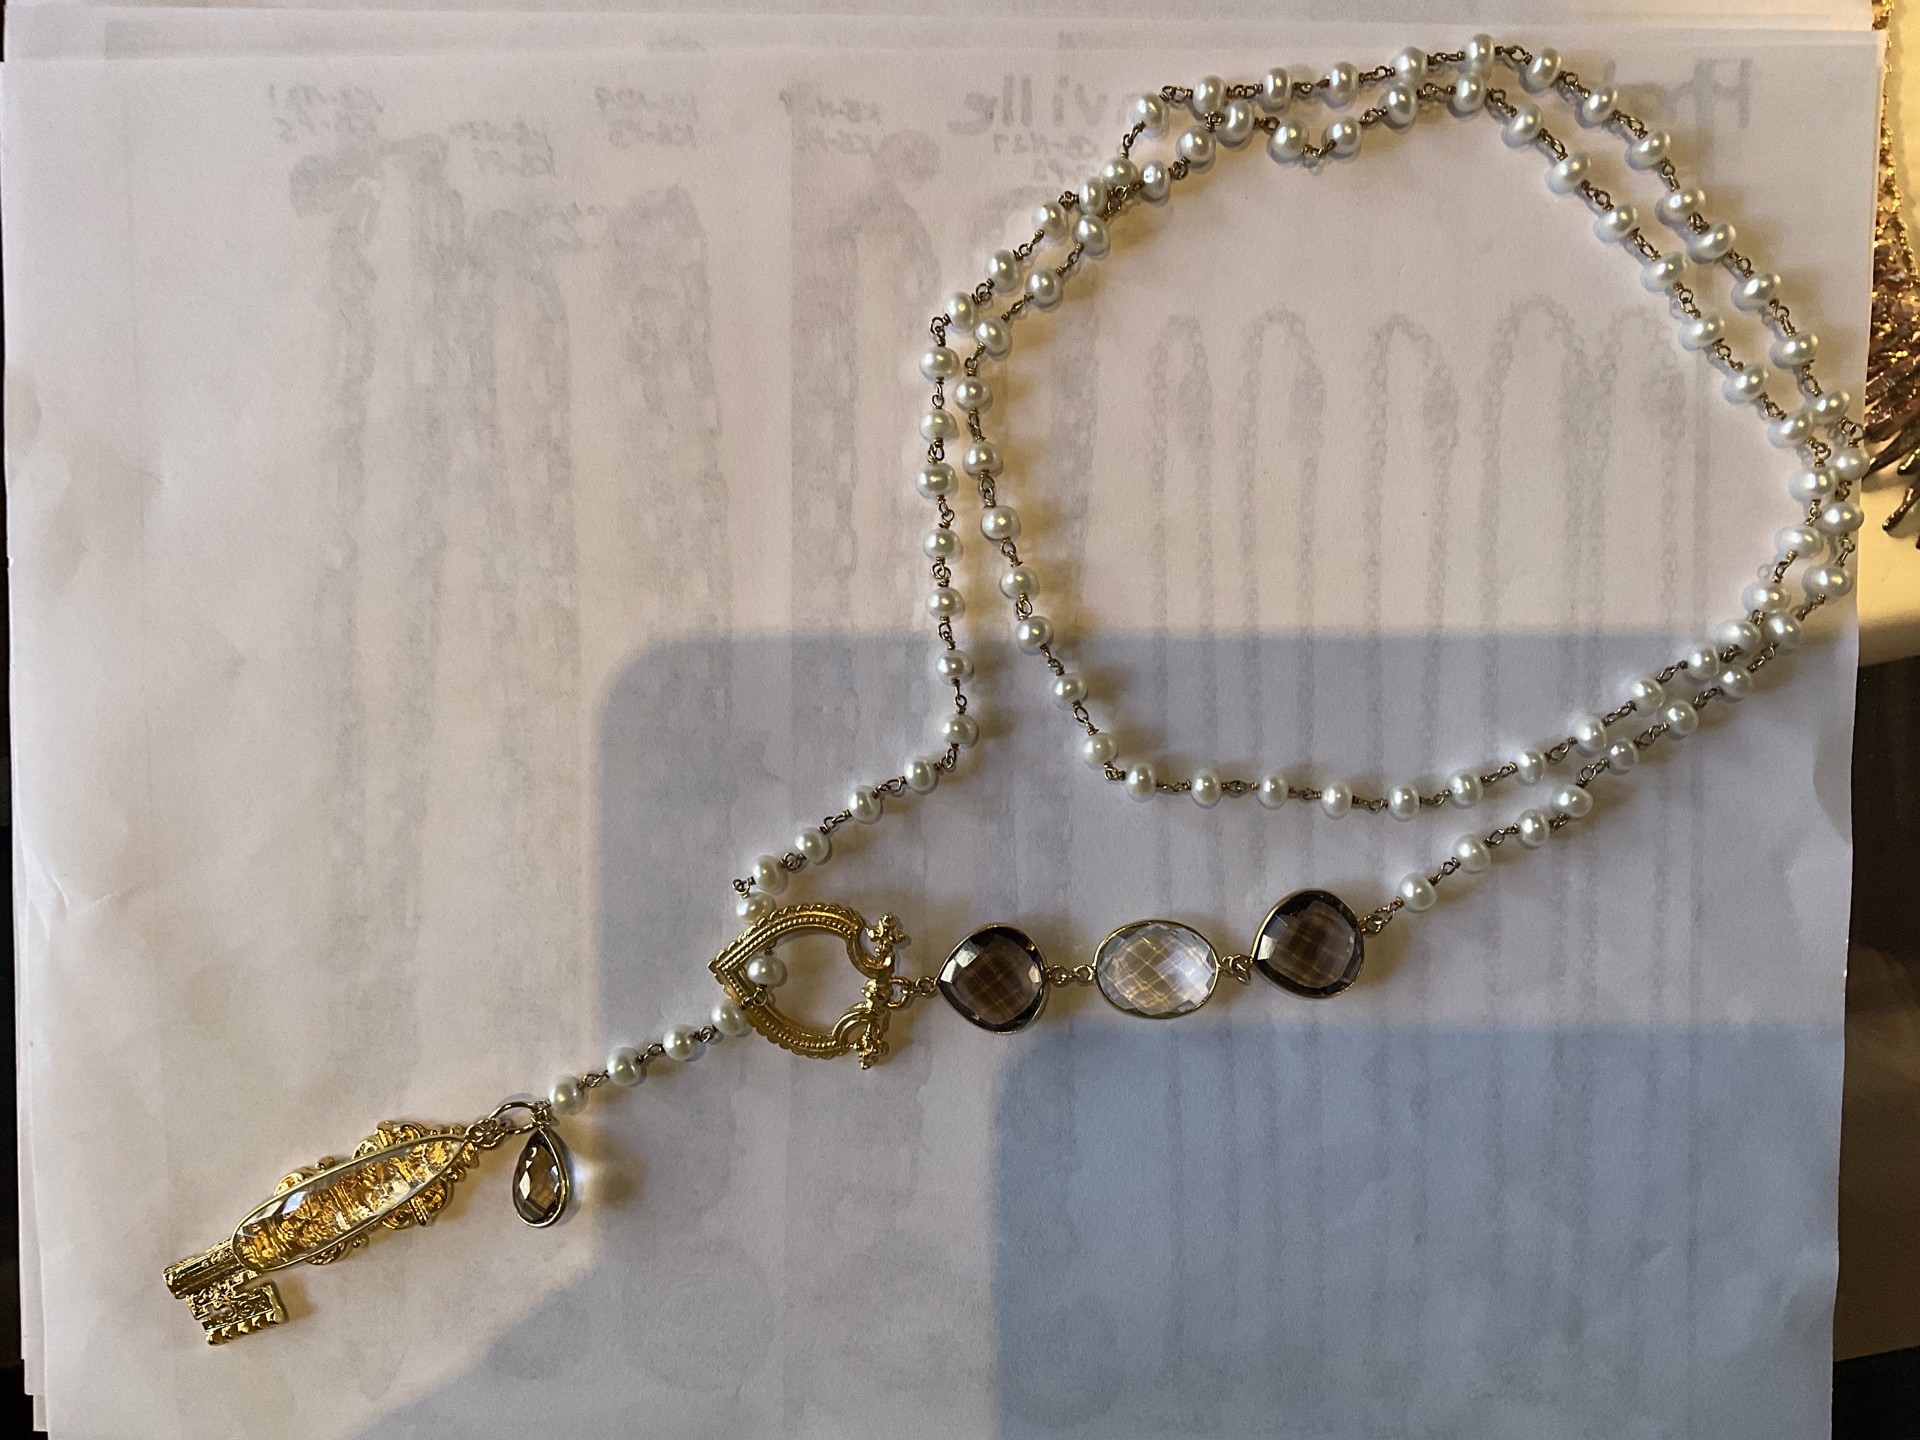 Gold Vermeil and Pearl Lariat with Smokey Quartz and Clear Quartz Bezels and Gold Plated Key Charm-KB-N21 by Karen Birchmier